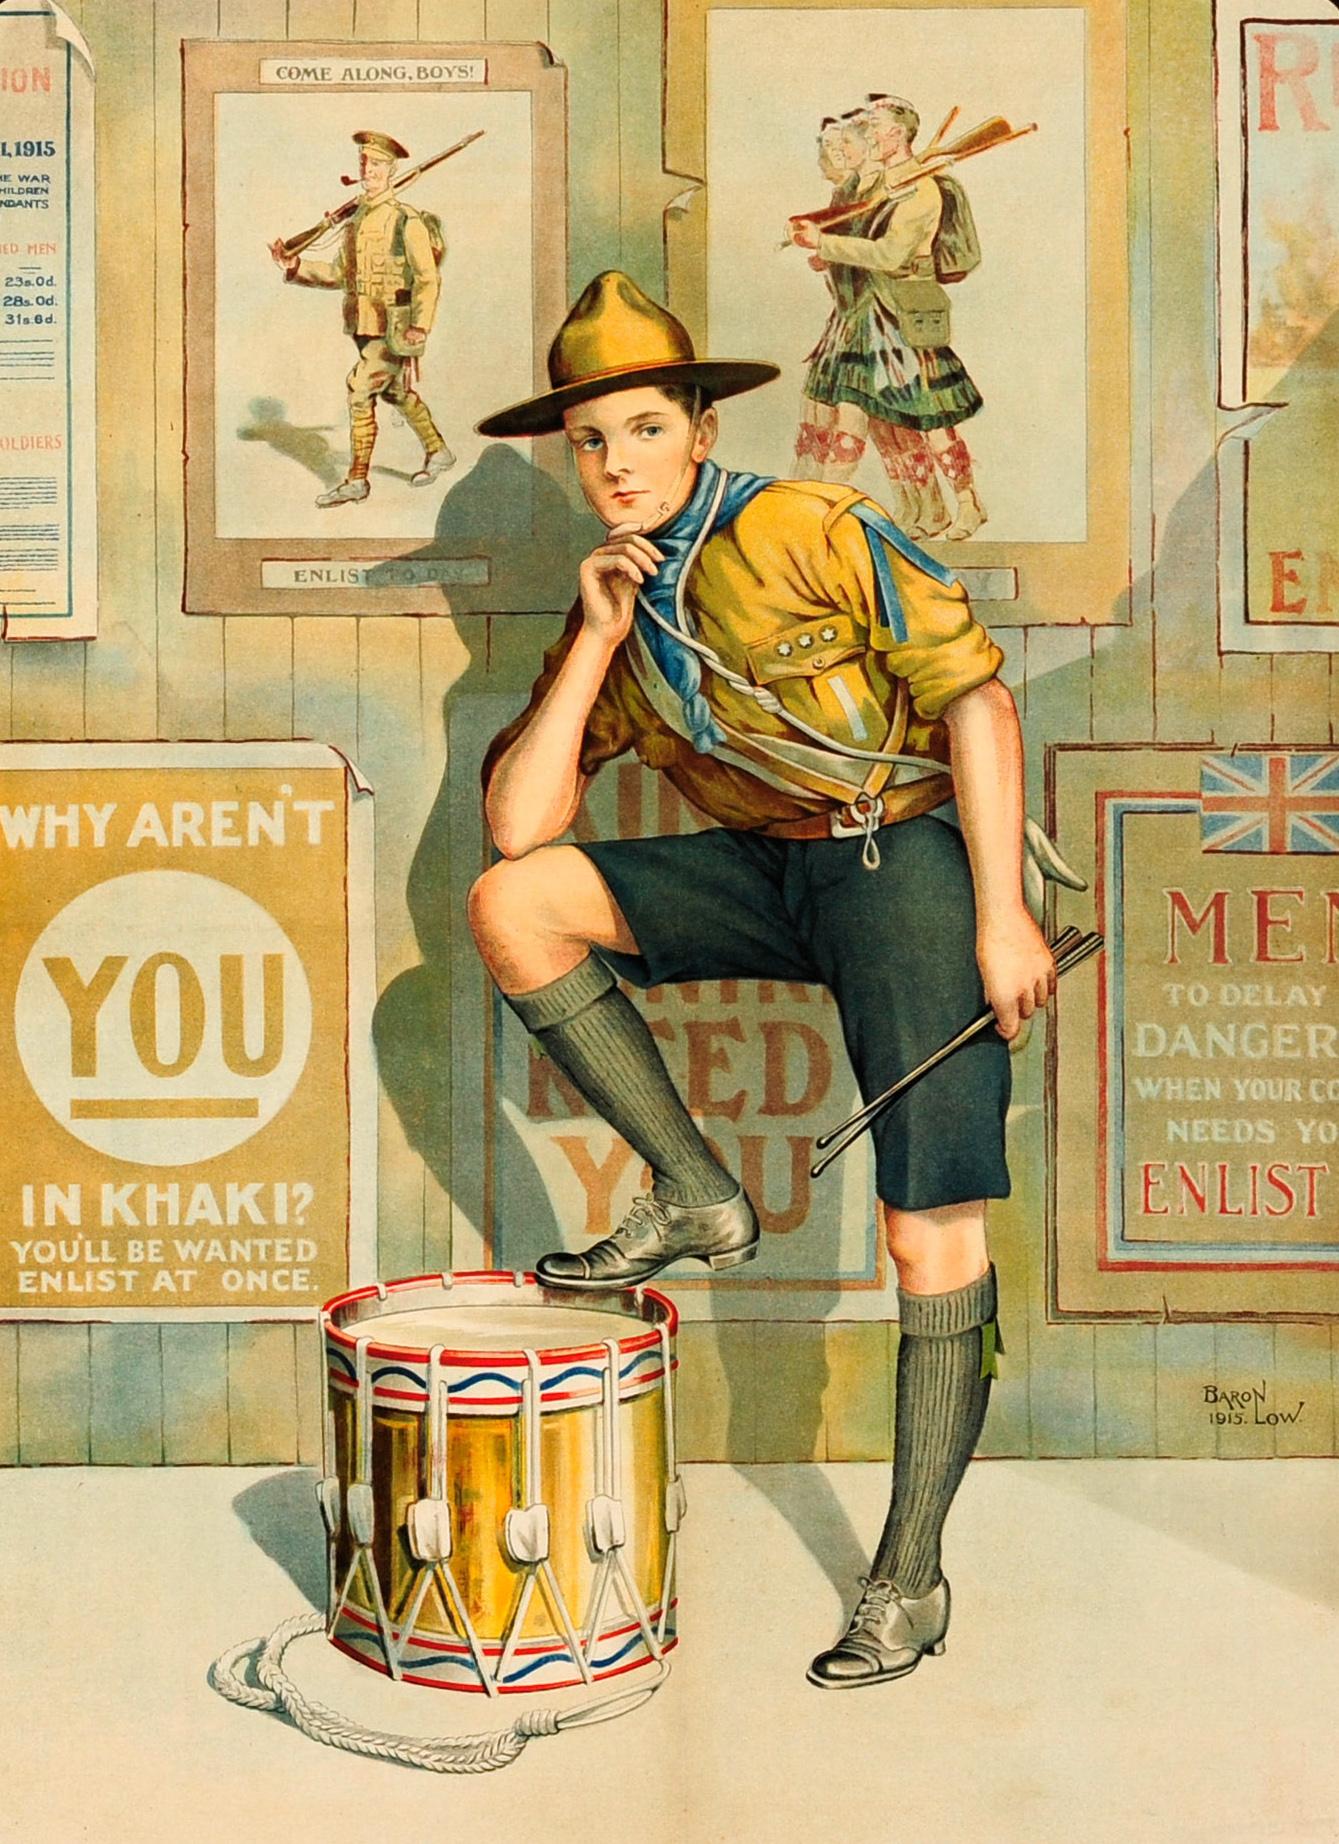 Original antique World War One propaganda poster: Everyone Should Do His Bit – Enlist Now featuring an image of young boy in uniform enrolling in the army as the drummer boy, his right foot on a drum standing in front of a wall covered with posters